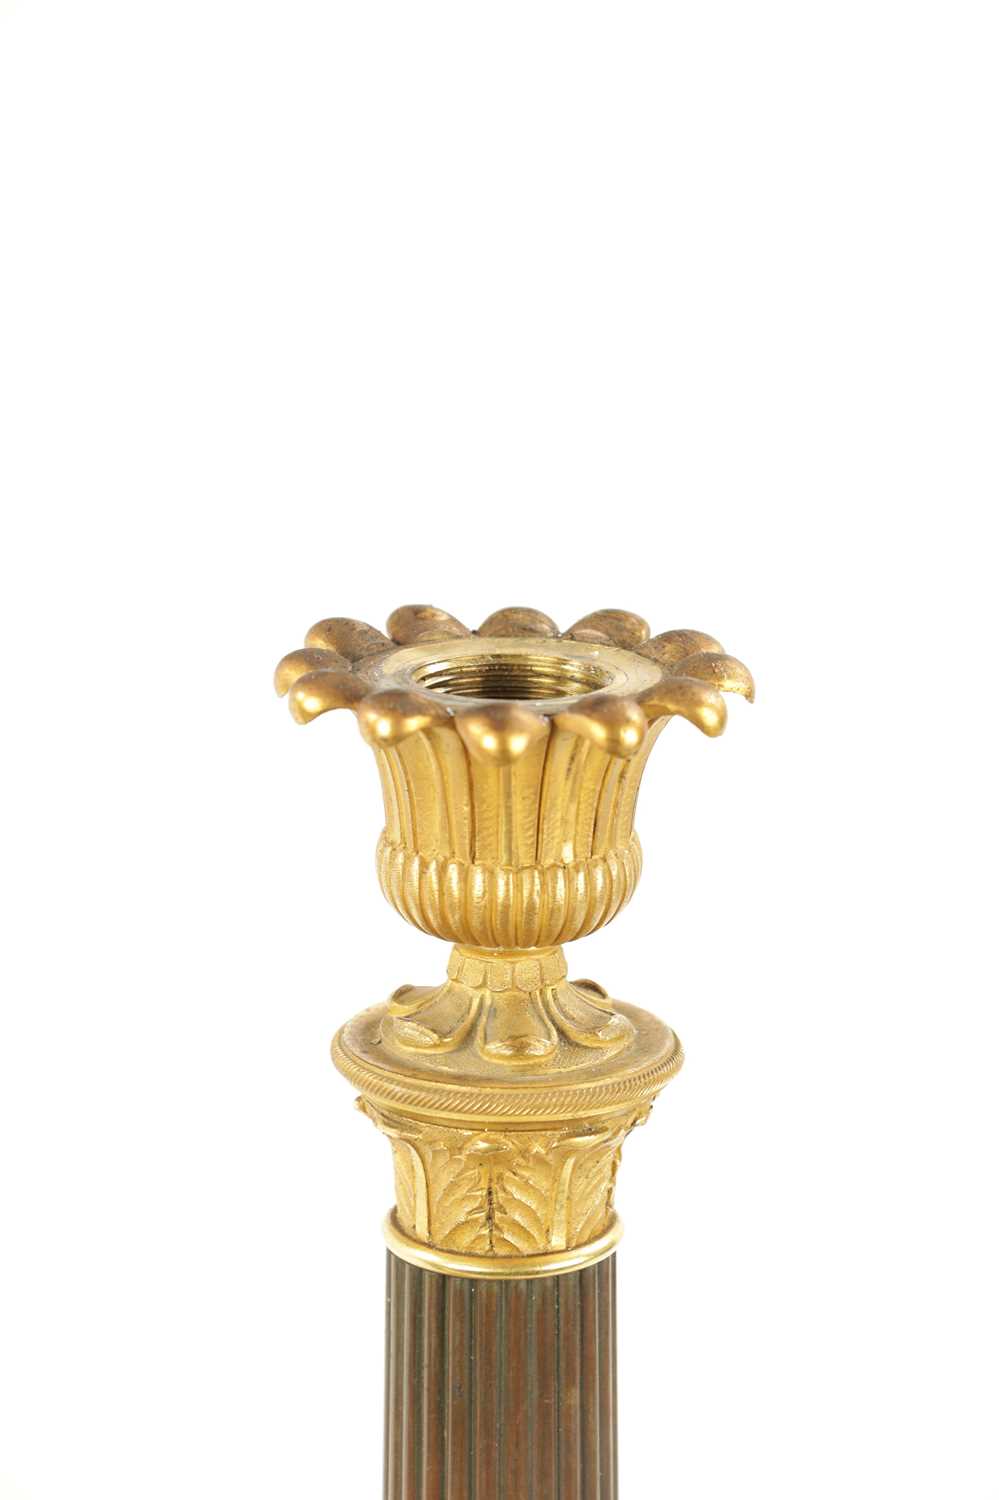 A PAIR OF REGENCY BRONZE AND ORMOLU CANDLESTICKS WITH LATER OIL LAMP FITTINGS - Image 7 of 12